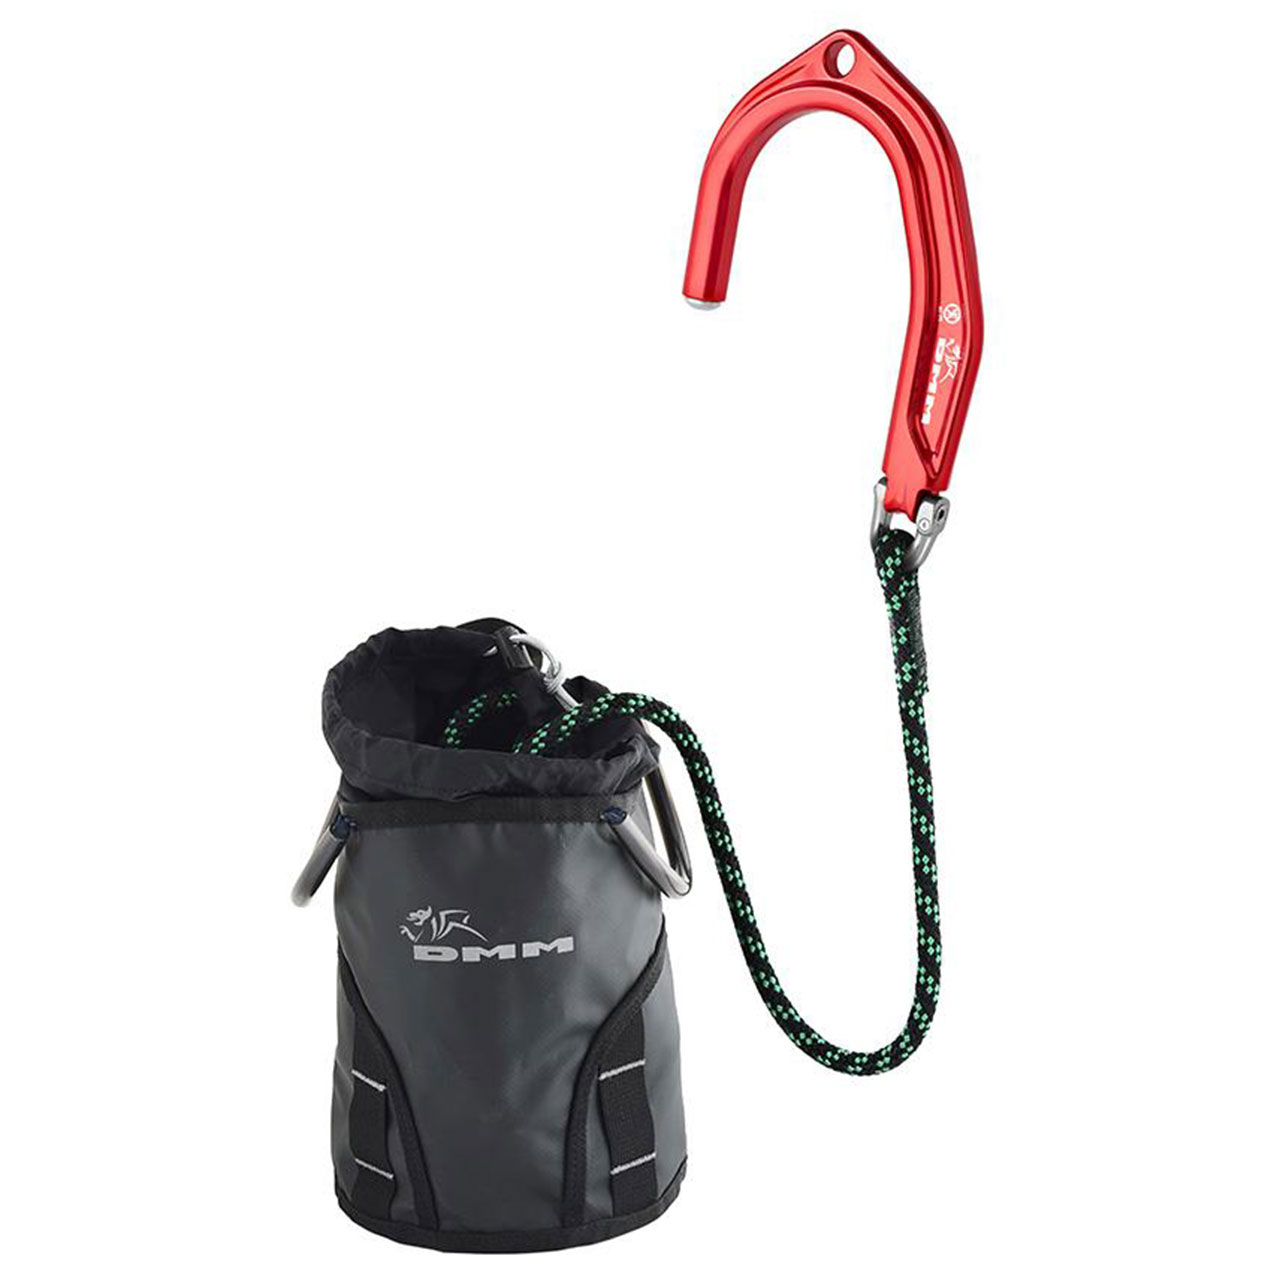 Rope Retrievers & Positioning Aids for Tree Climbers